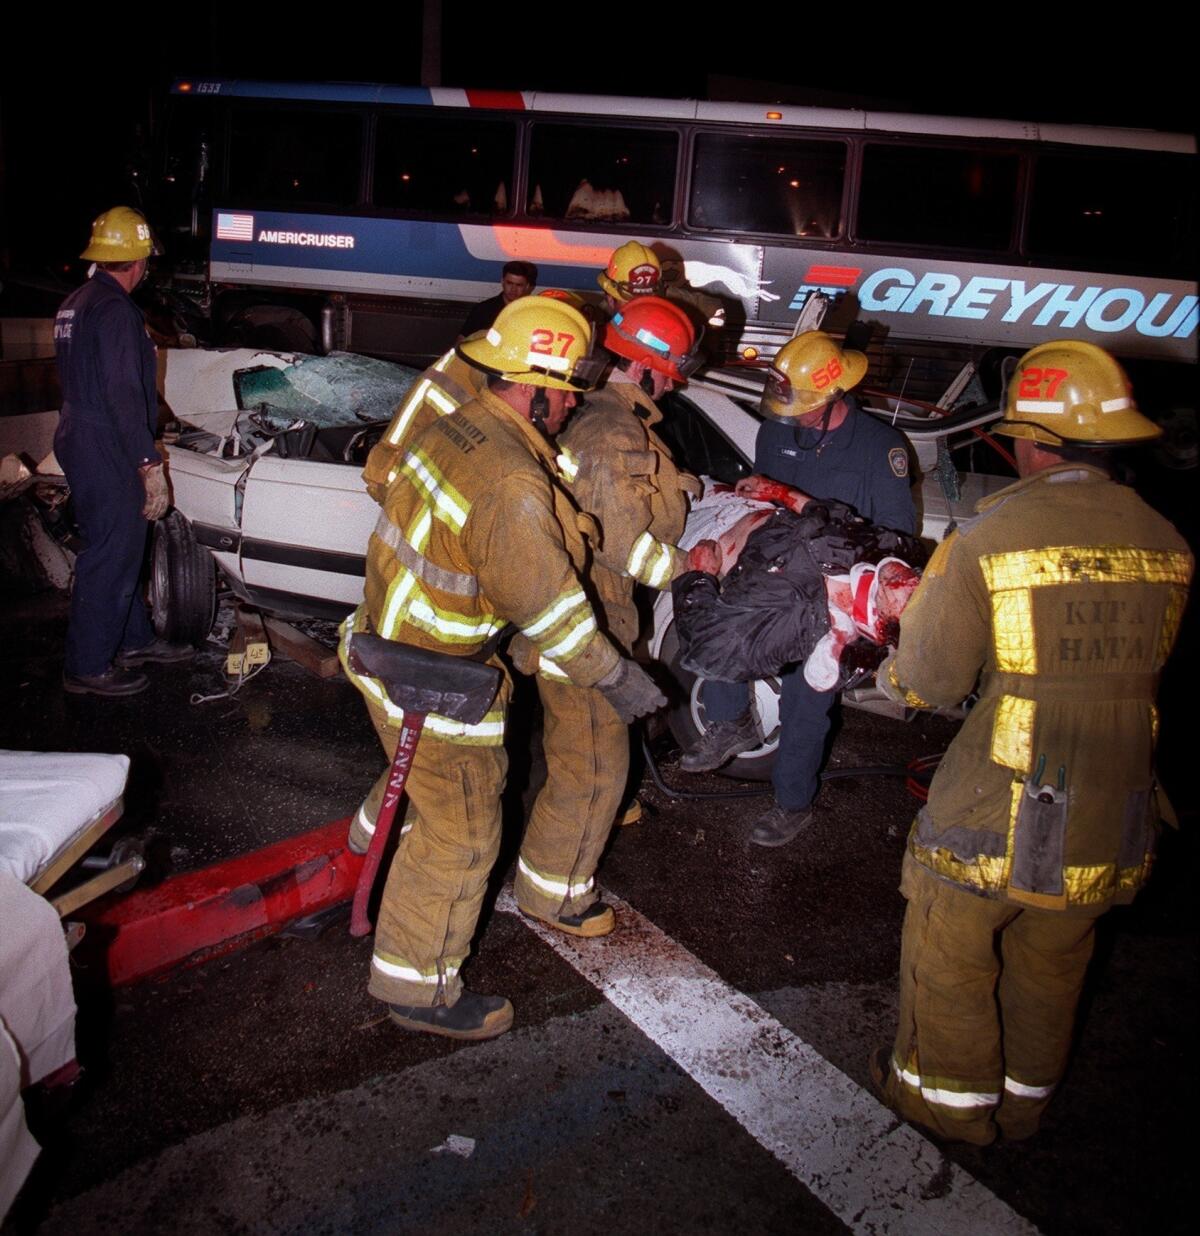 One person died and over a dozen people were injured after a hit-and-run driver crashed his car into a Greyhound bus at the intersection of Sunset Boulevard and Vine Street in Hollywood.